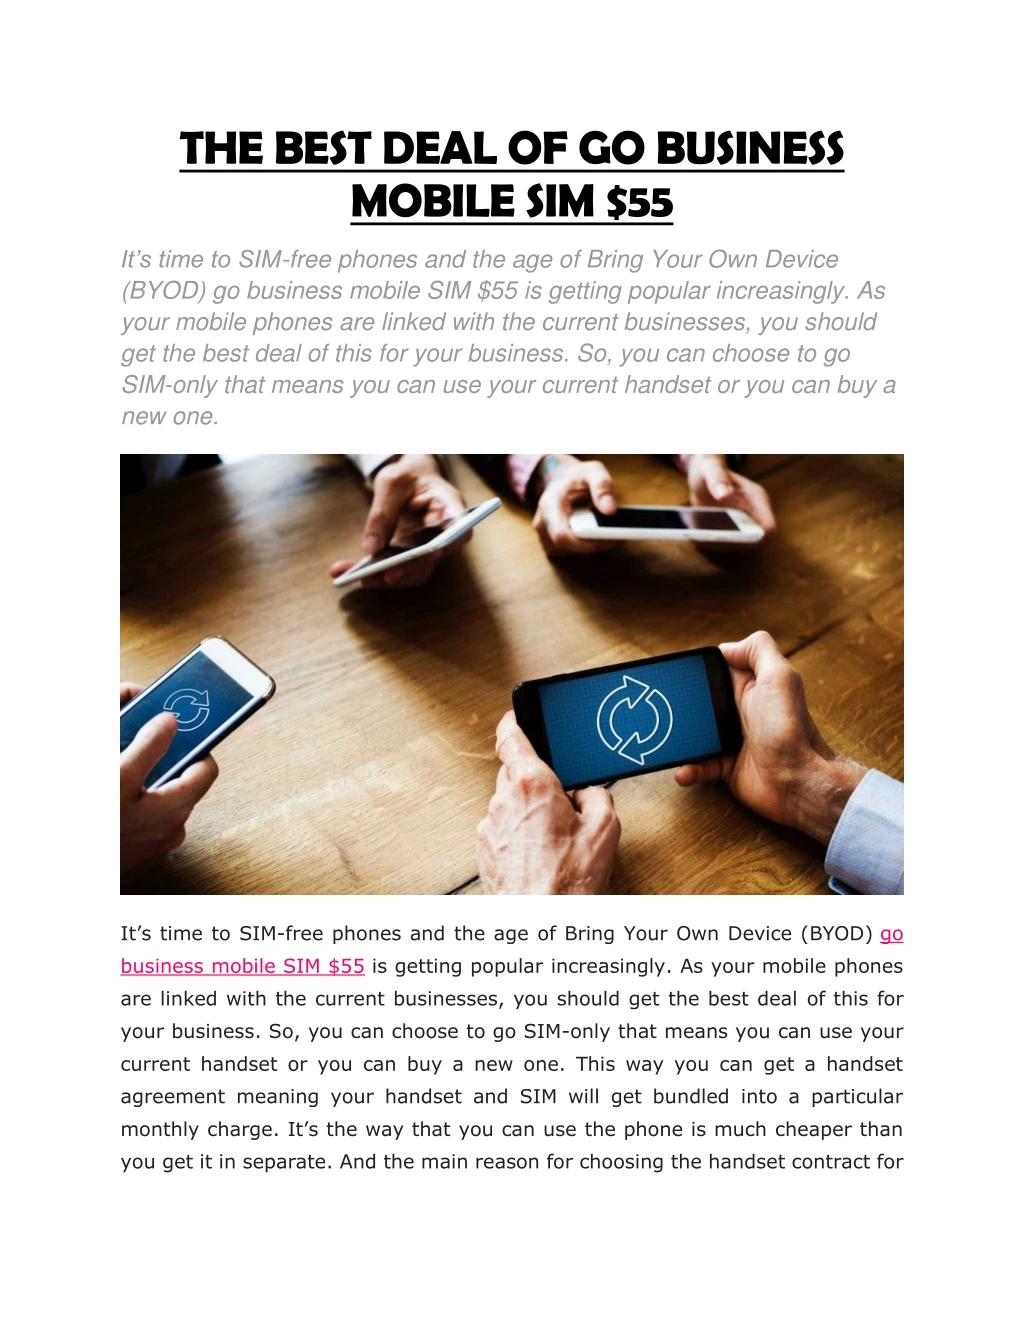 the best deal of go business mobile sim 55